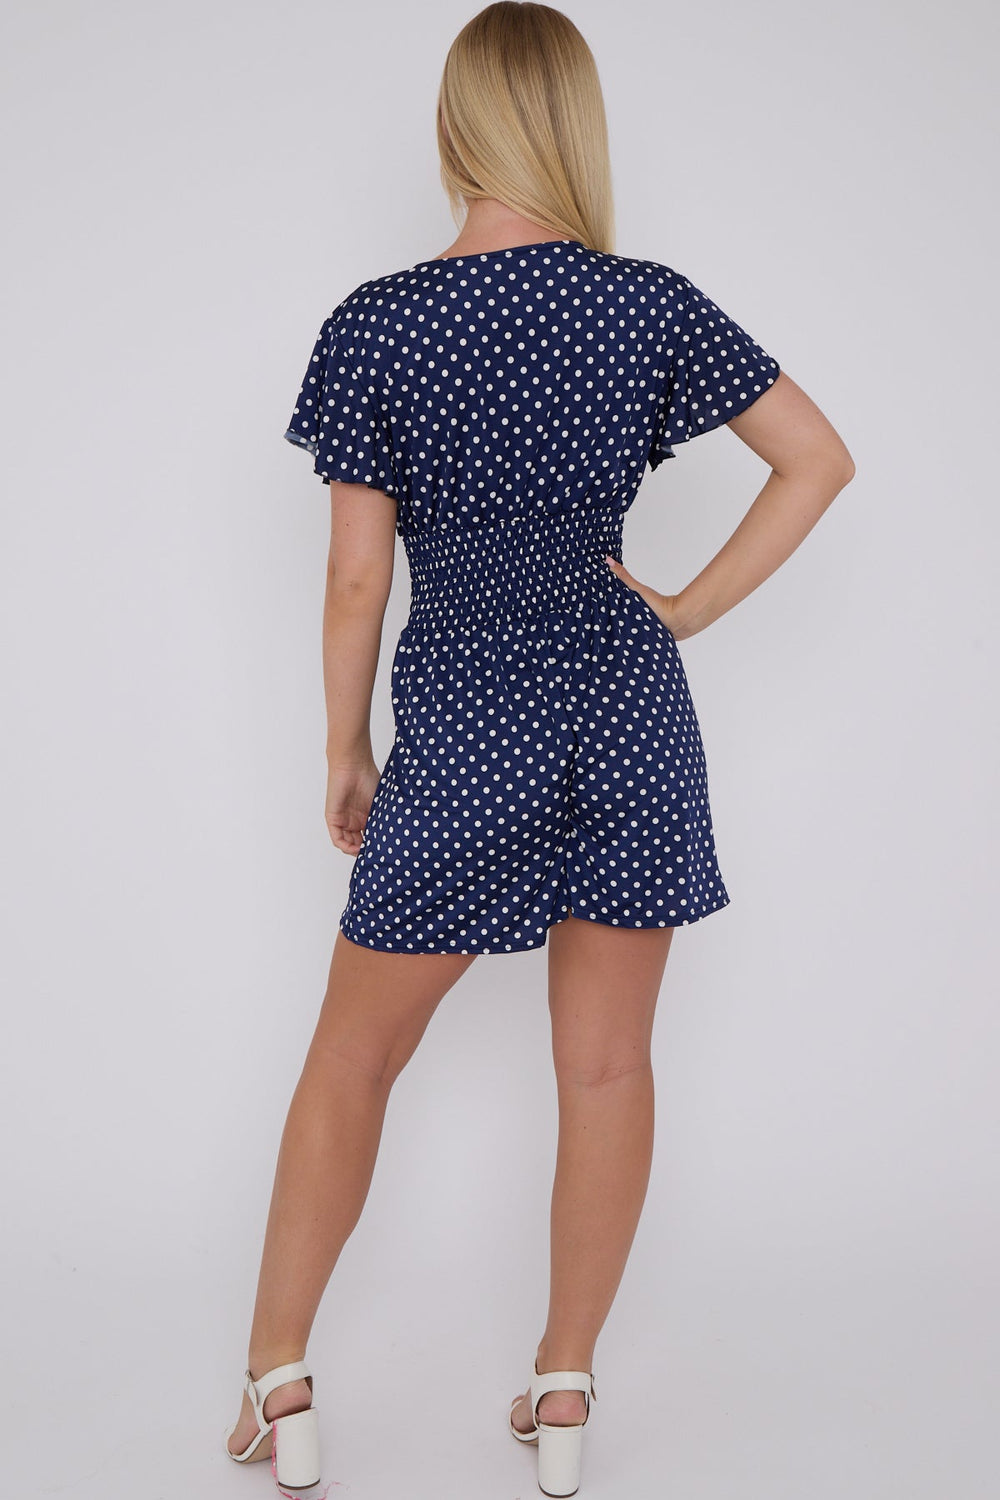 POLKA DOT PLAYSUIT (MIXED COLOUR PACK) (8416916832504) (8512014352632)